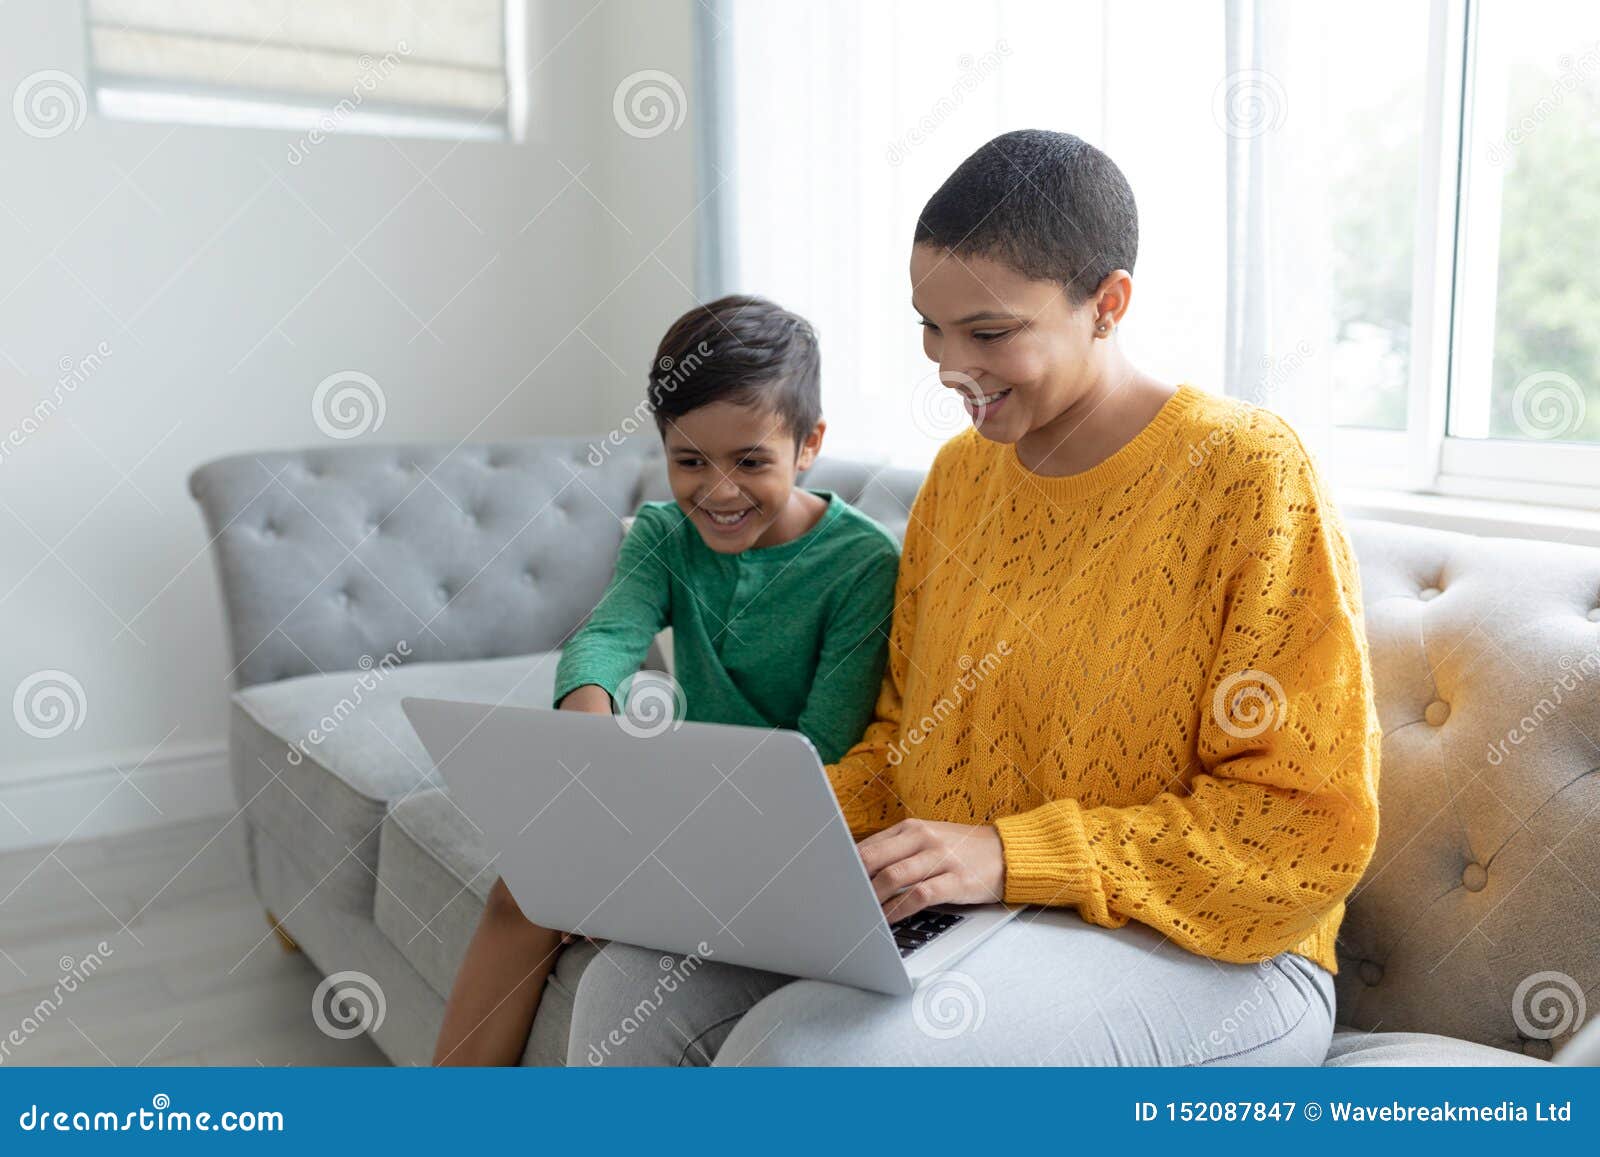 Mother And Son Using Laptop On A Sofa In Living Room Stock Image